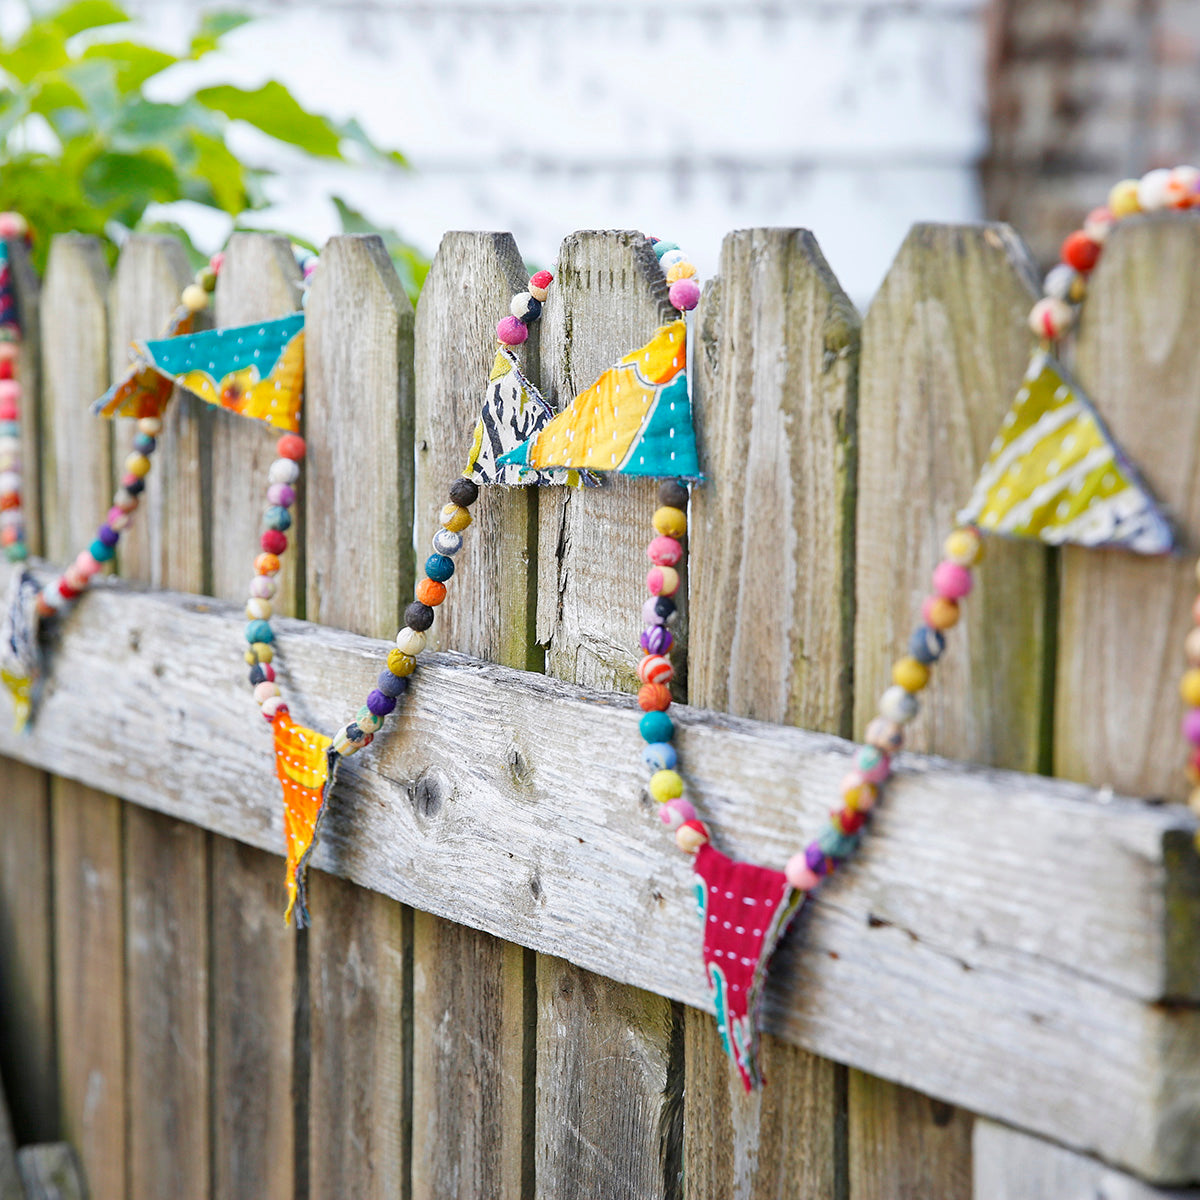 Kantha Bunting Garland hangs on a fence.